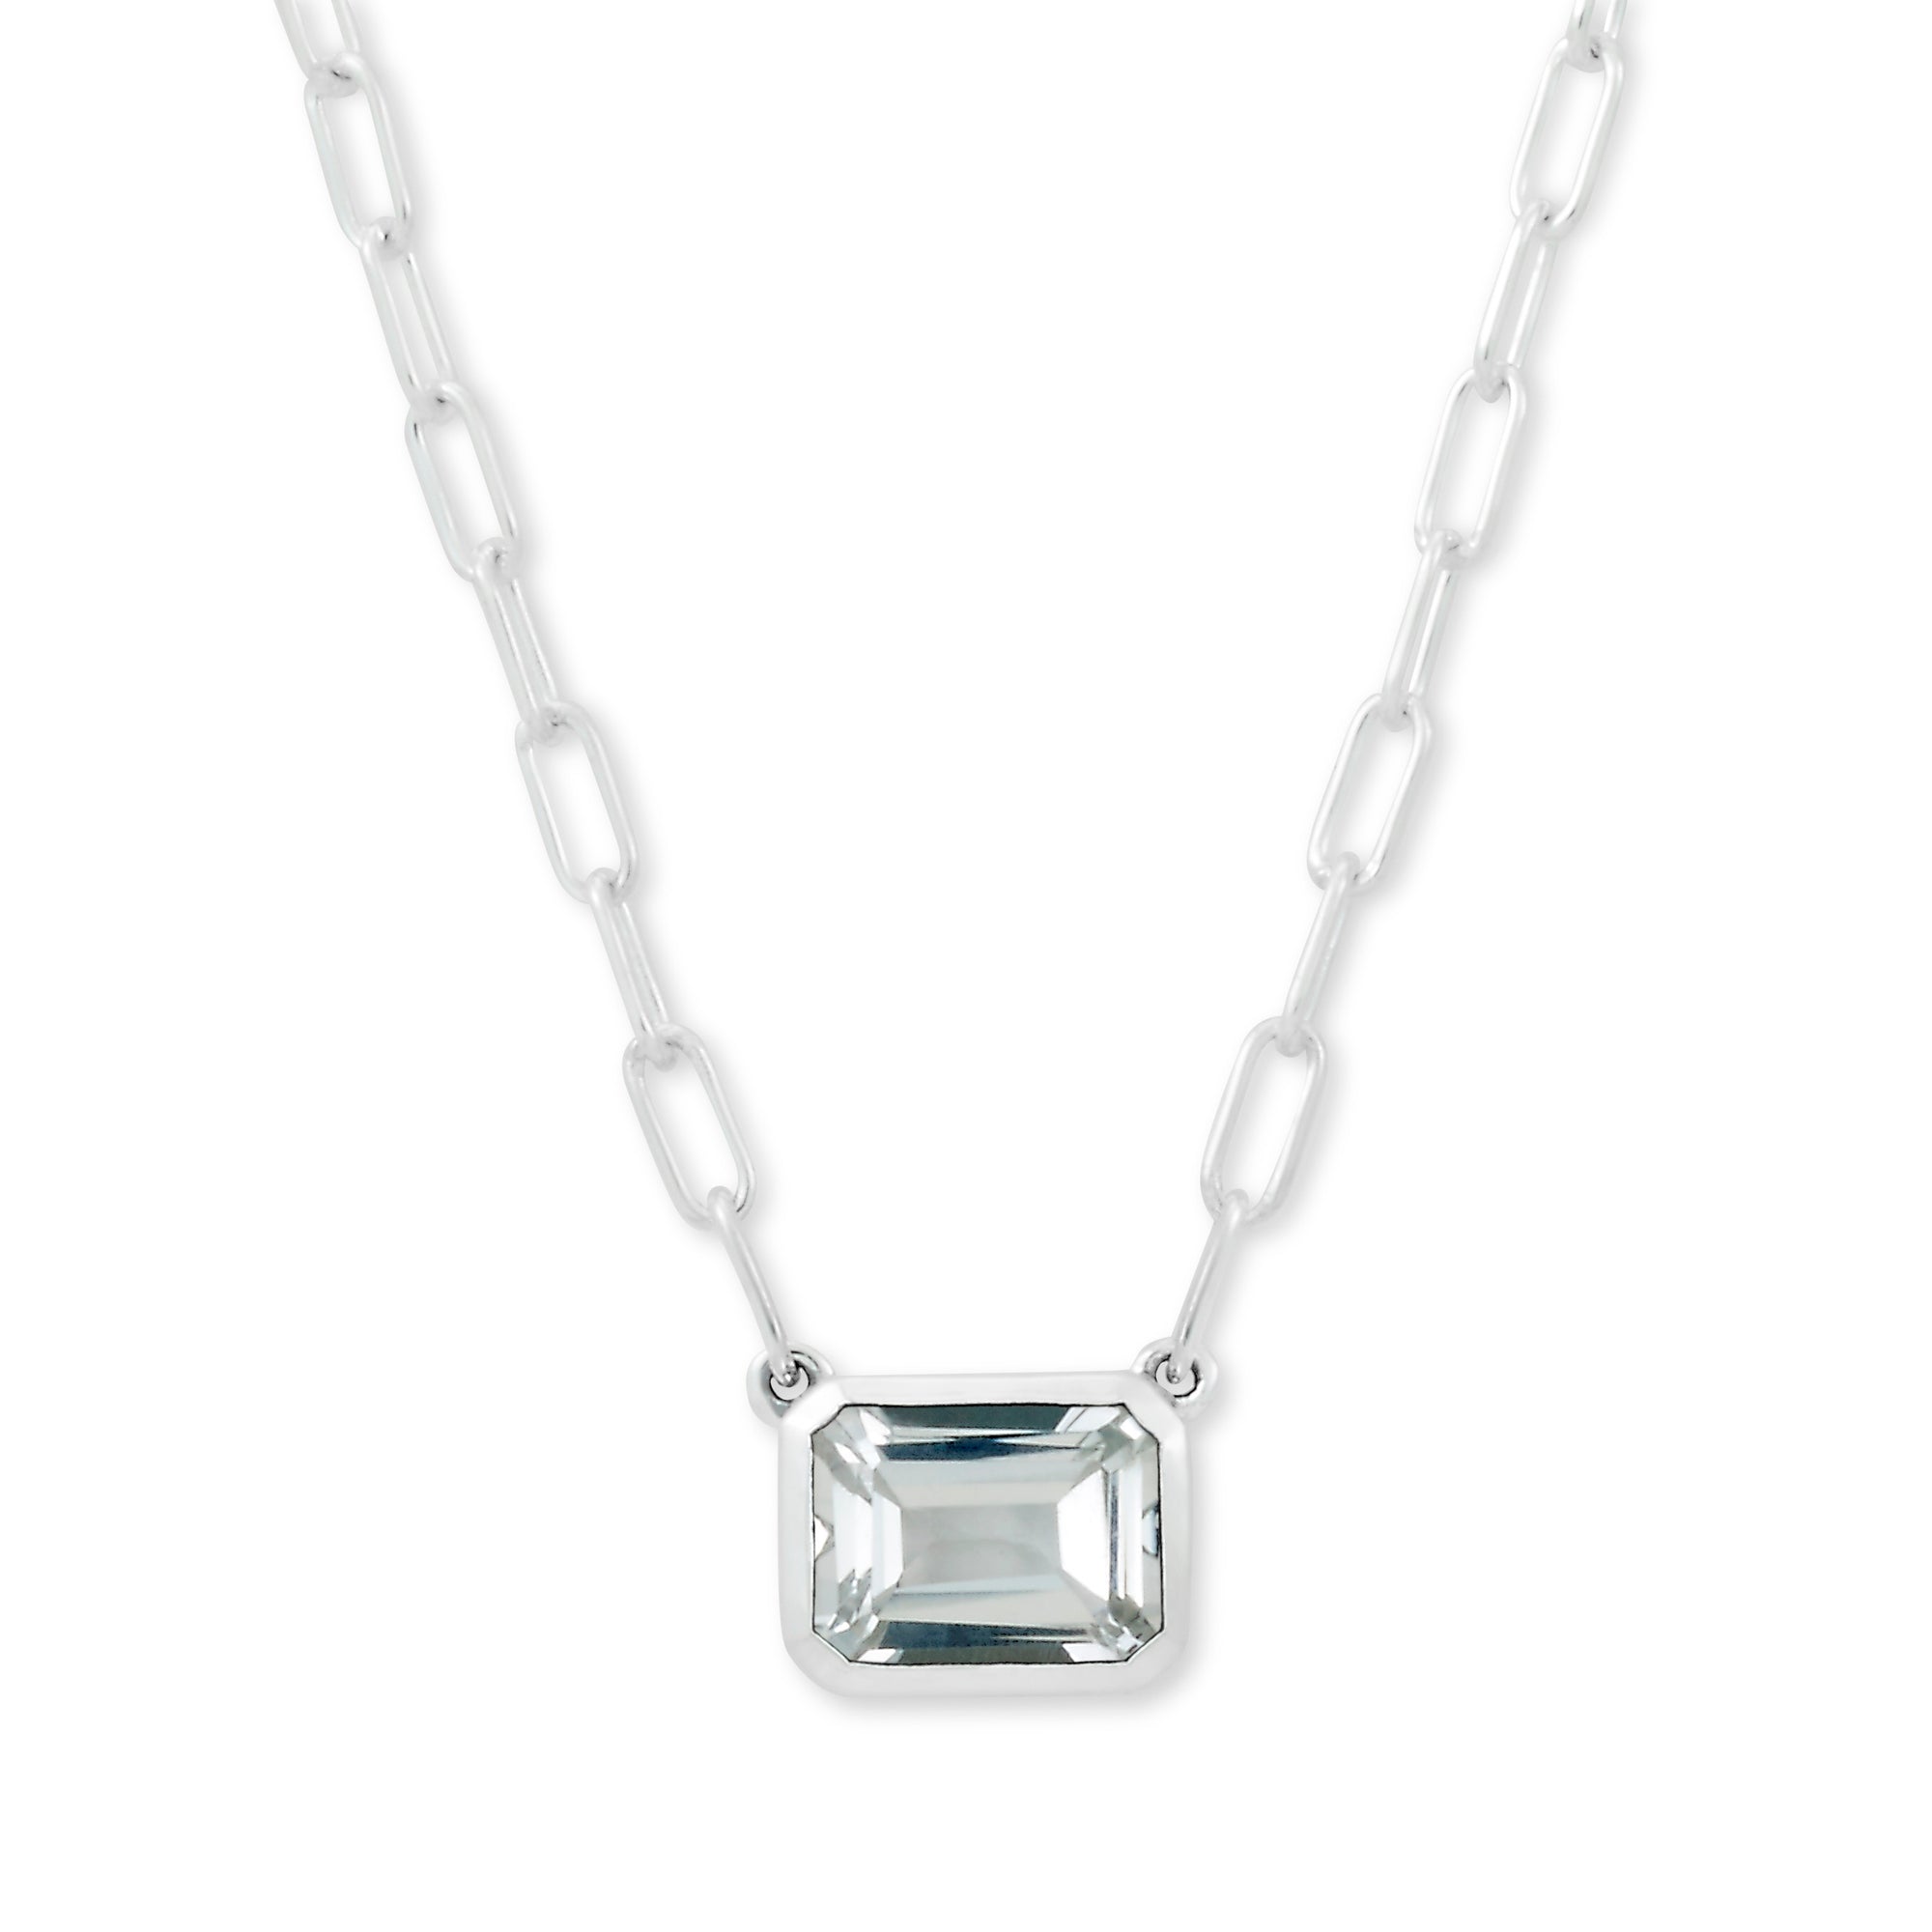 White Topaz Eirini Necklace available at Talisman Collection Fine Jewelers in El Dorado Hills, CA and online. Specs: White Topaz Eirini Necklace features an emerald-cut white topaz solitaire measuring 7x9mm, and is set in Sterling Silver.  